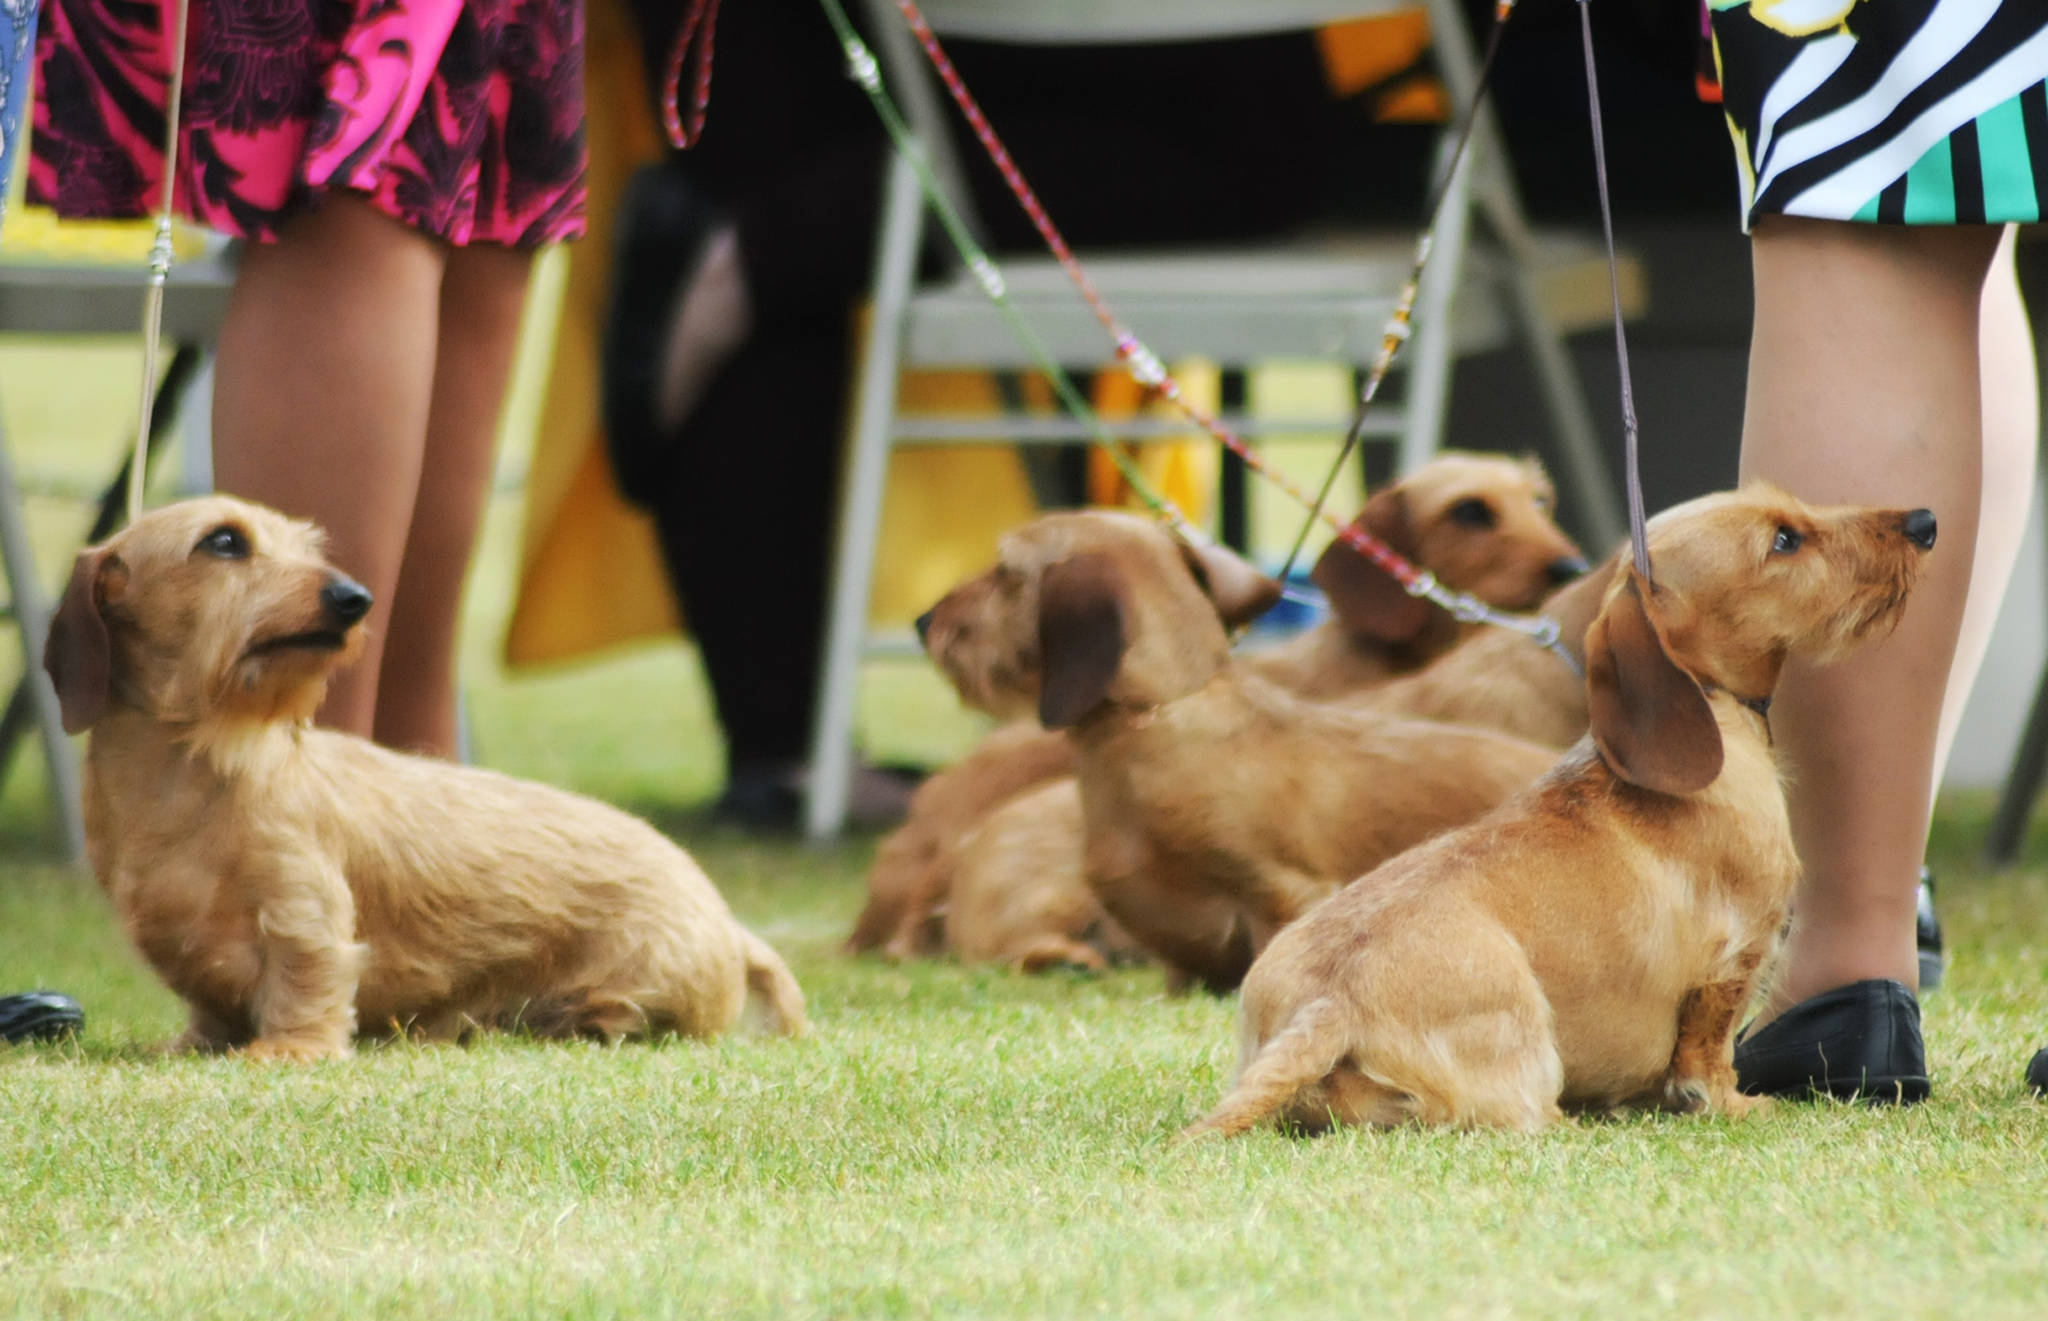 Dogs wait with their trainers before competing in the Kenai Kennel Club’s annual dog show, obedience and agility trials on Saturday, July 14, 2018 in Soldotna, Alaska. Dog owners come from all over the state to take part in the events each year. (Photo by Elizabeth Earl/Peninsula Clarion)